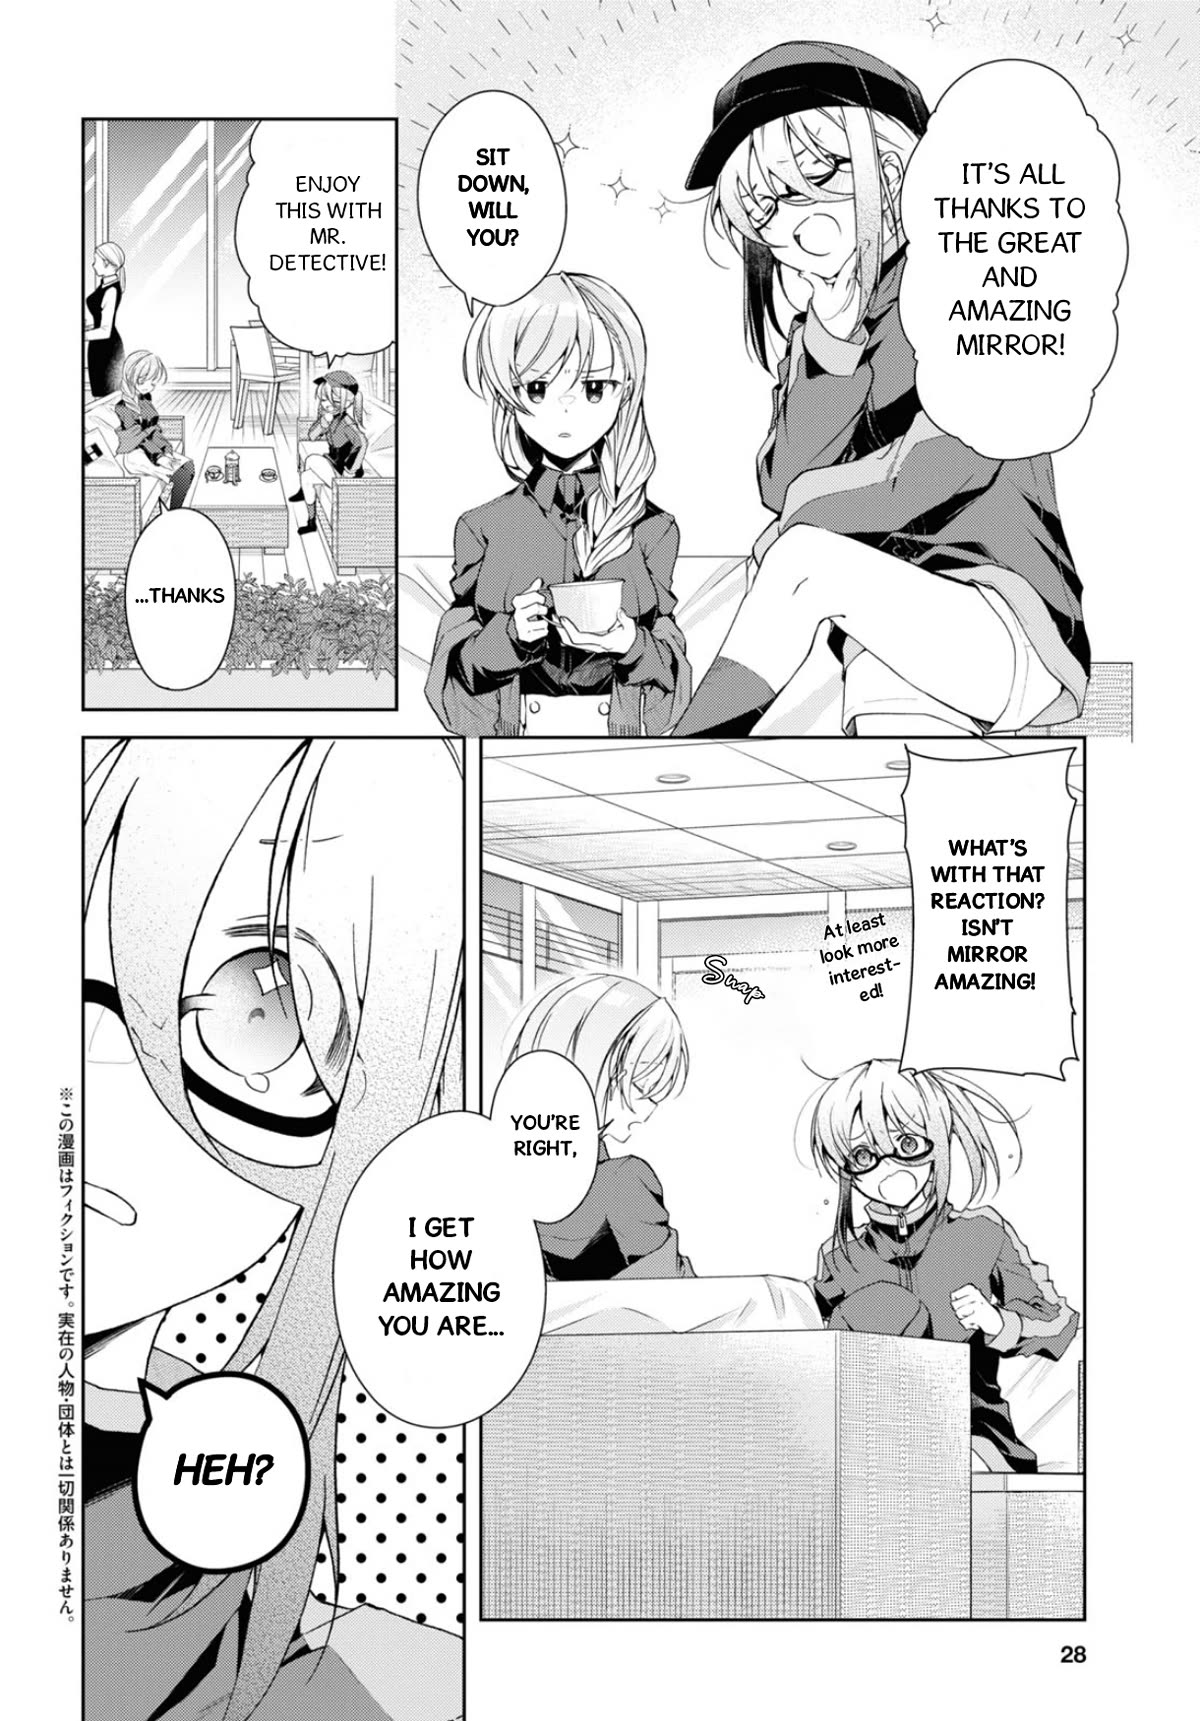 Isshiki-san Wants to Know About Love. - chapter 35 - #5